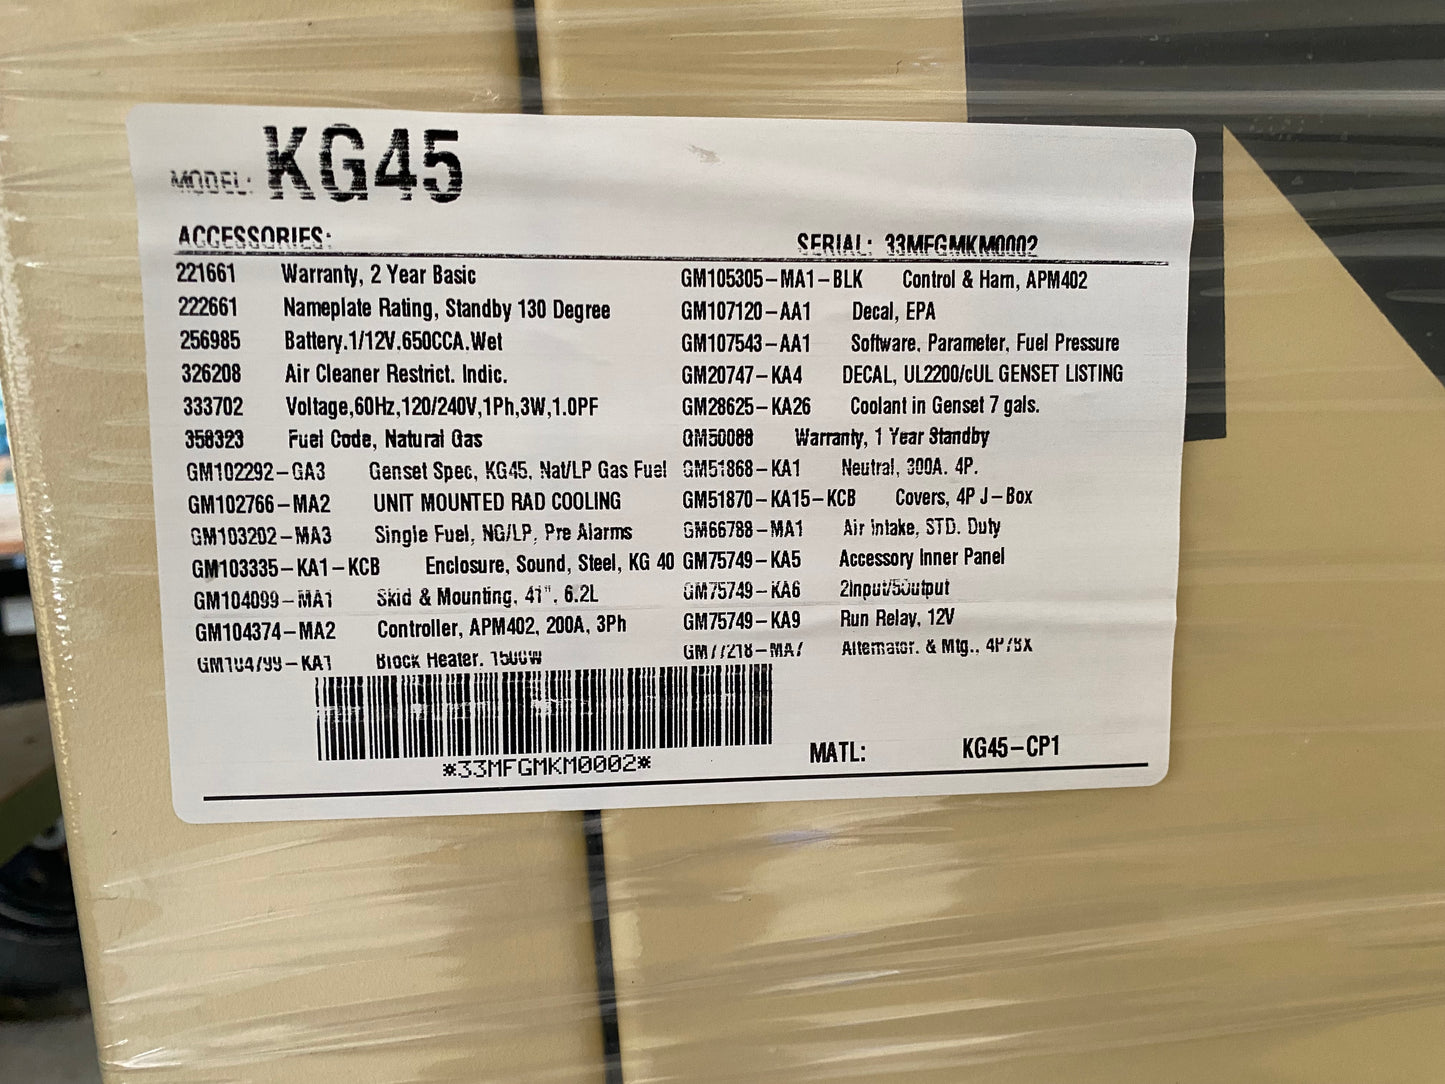 Kohler KG45 Gas Generator with Automatic Transfer Switch